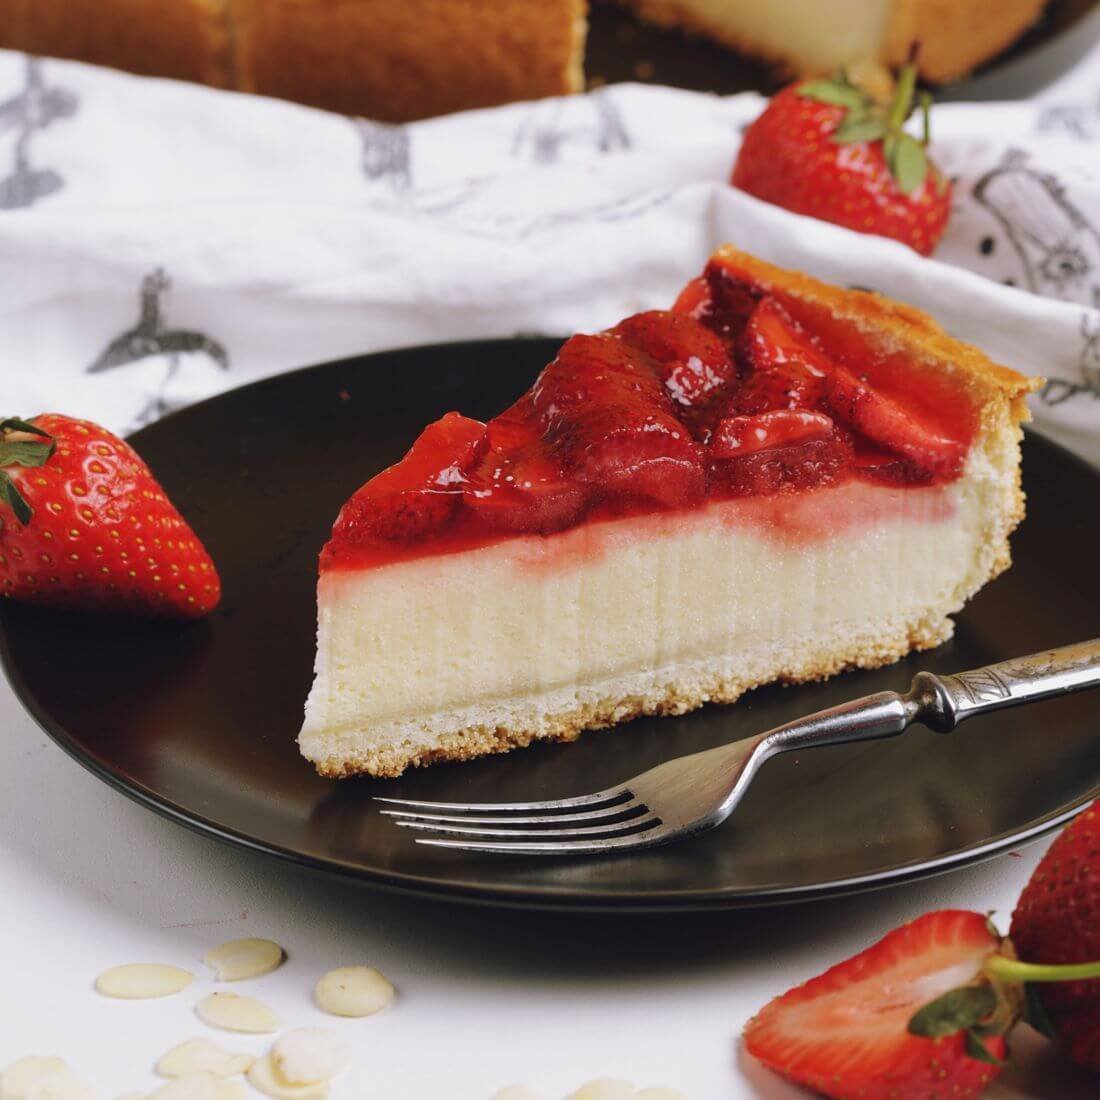 Cheesecake dale evans.